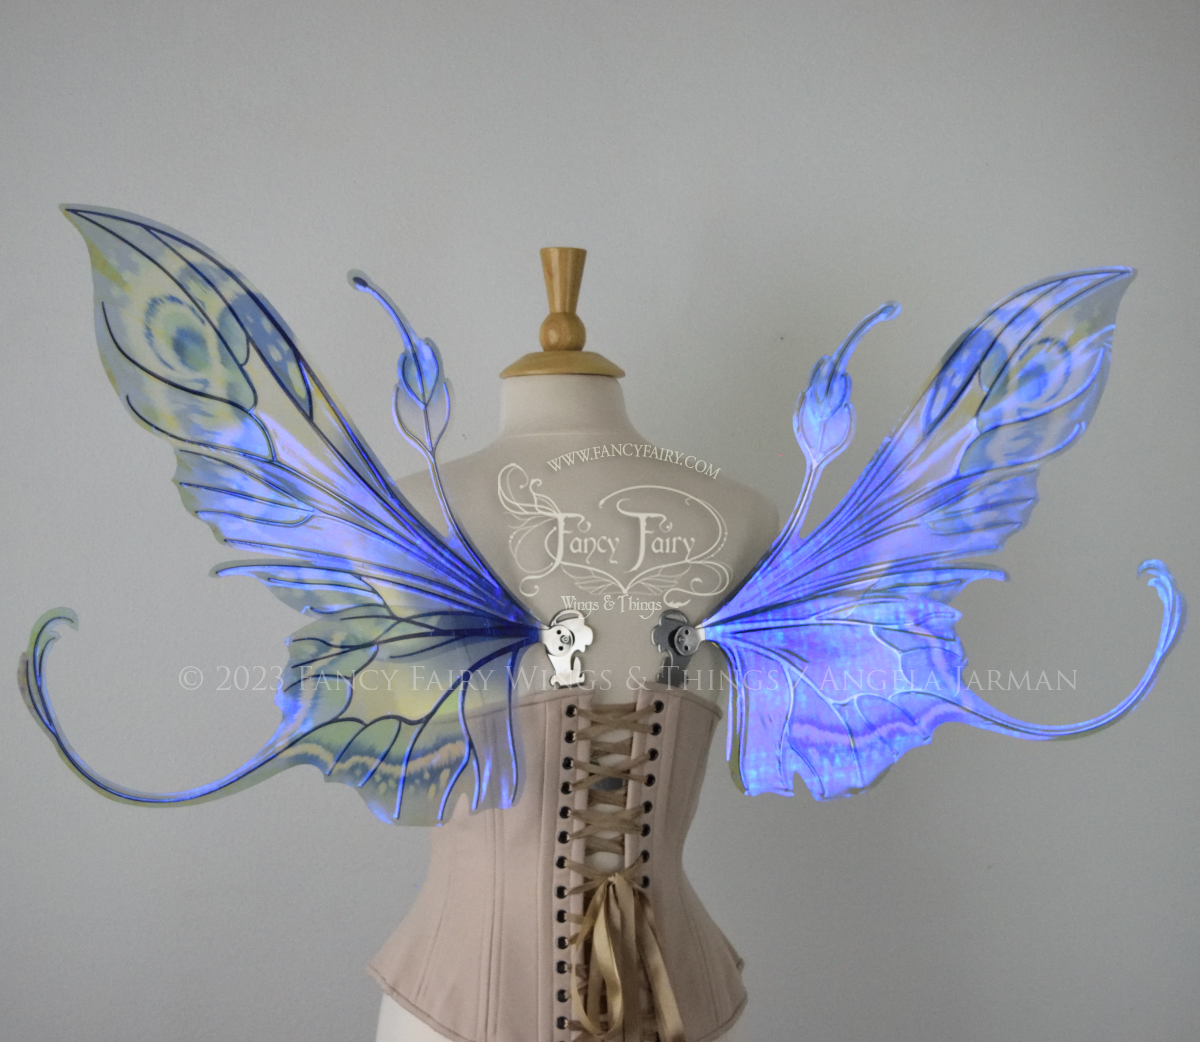 Back view of large blue, violet & teal painted iridescent fairy wings, elongated upper panels with antennae, bottom panels have a tail curving upwards, silver veins, worn on a dress form